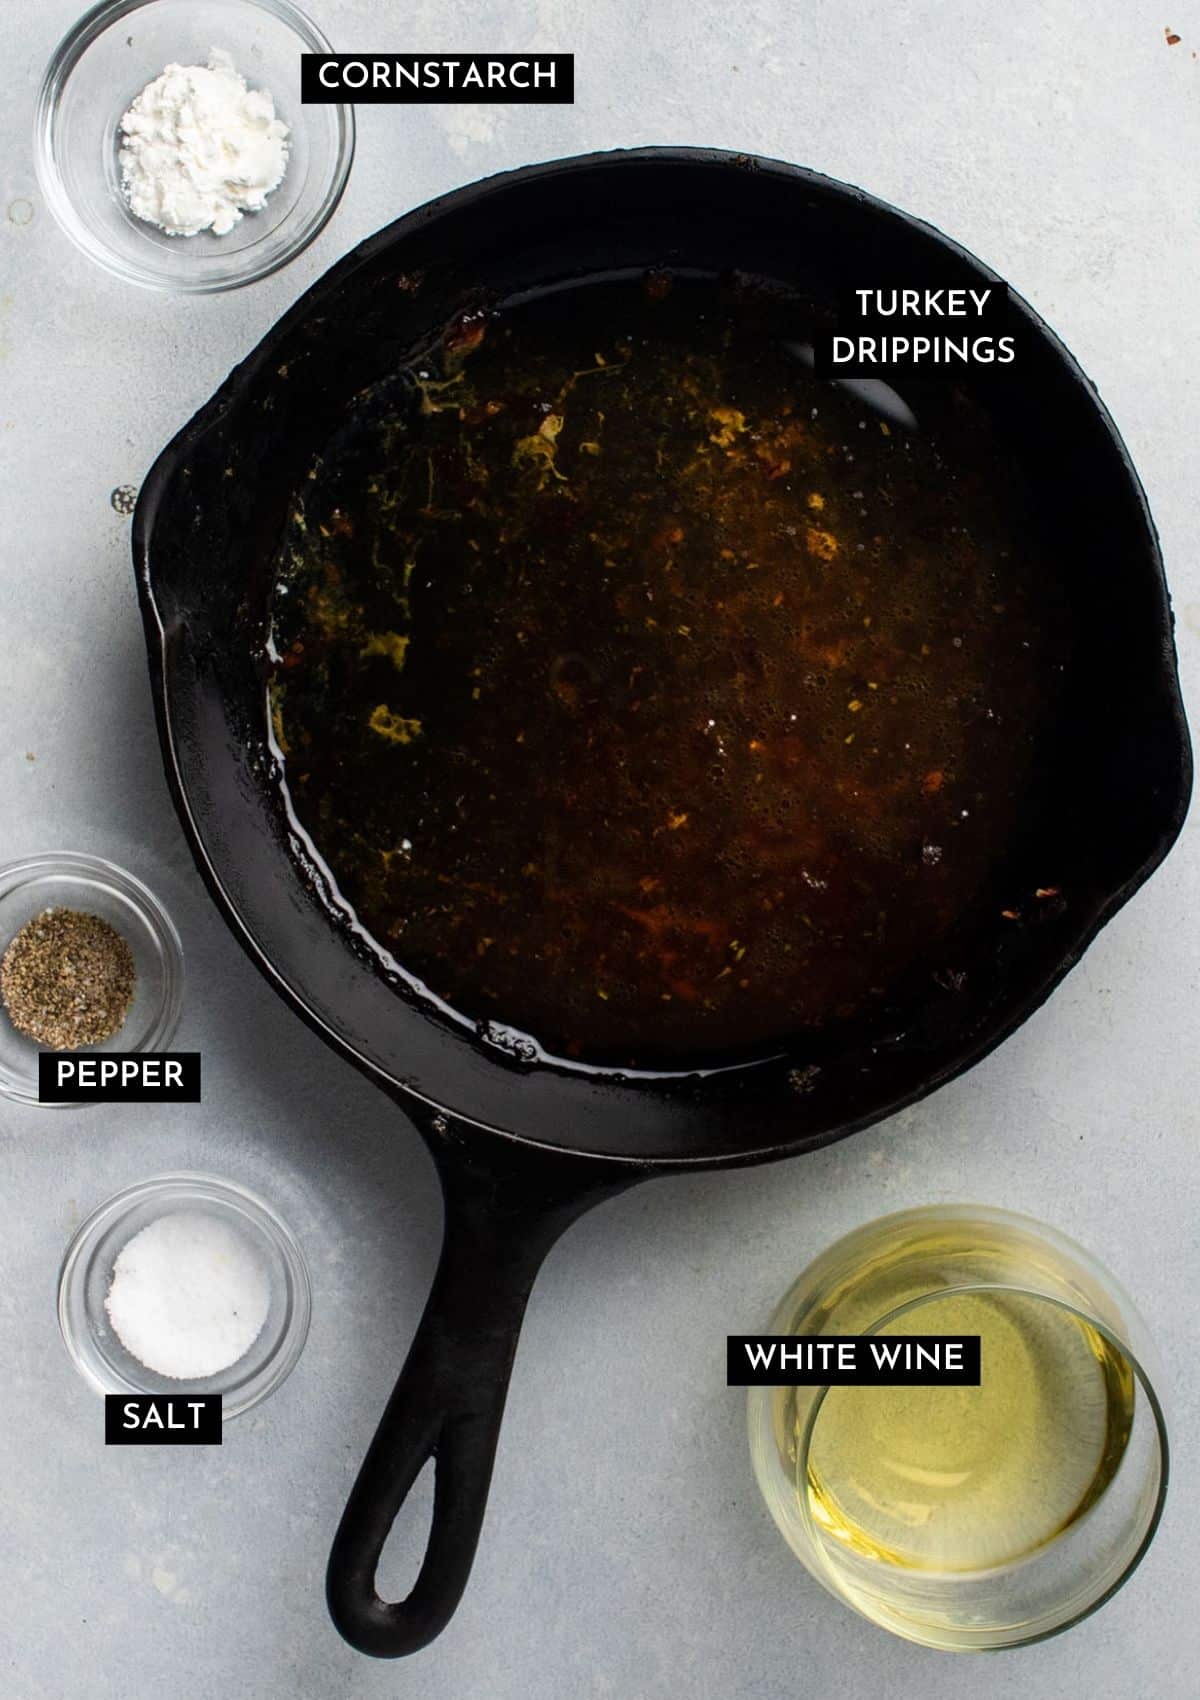 Turkey drippings in a cast iron skillet next to a glass of white wine and various seasonings.